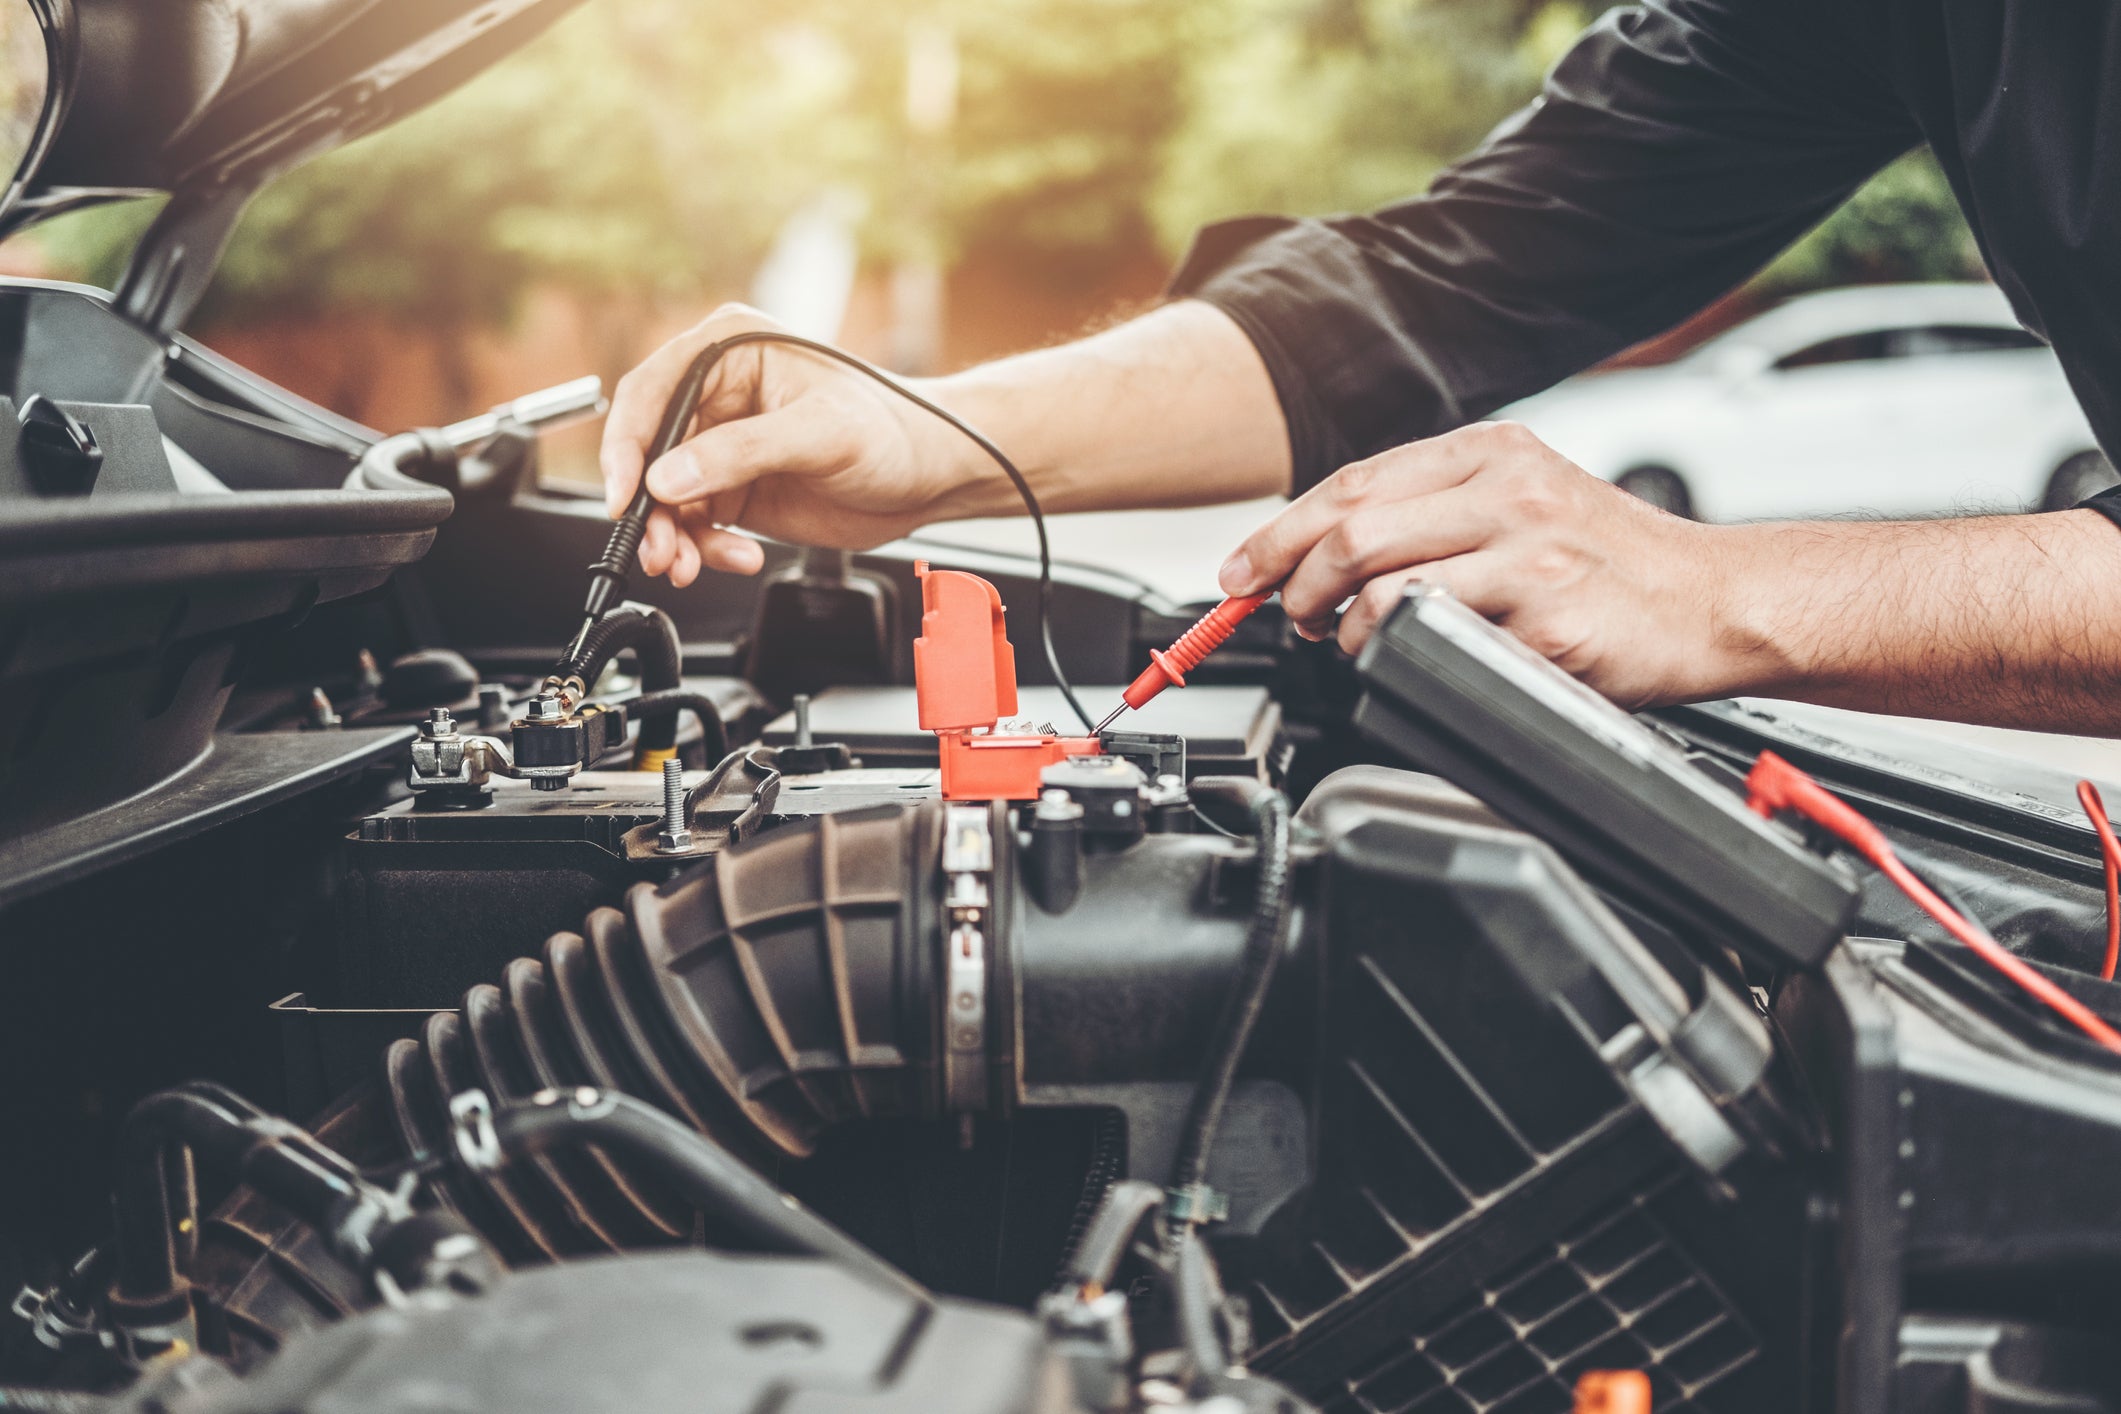 Get Your Battery Tested and Replaced Today!